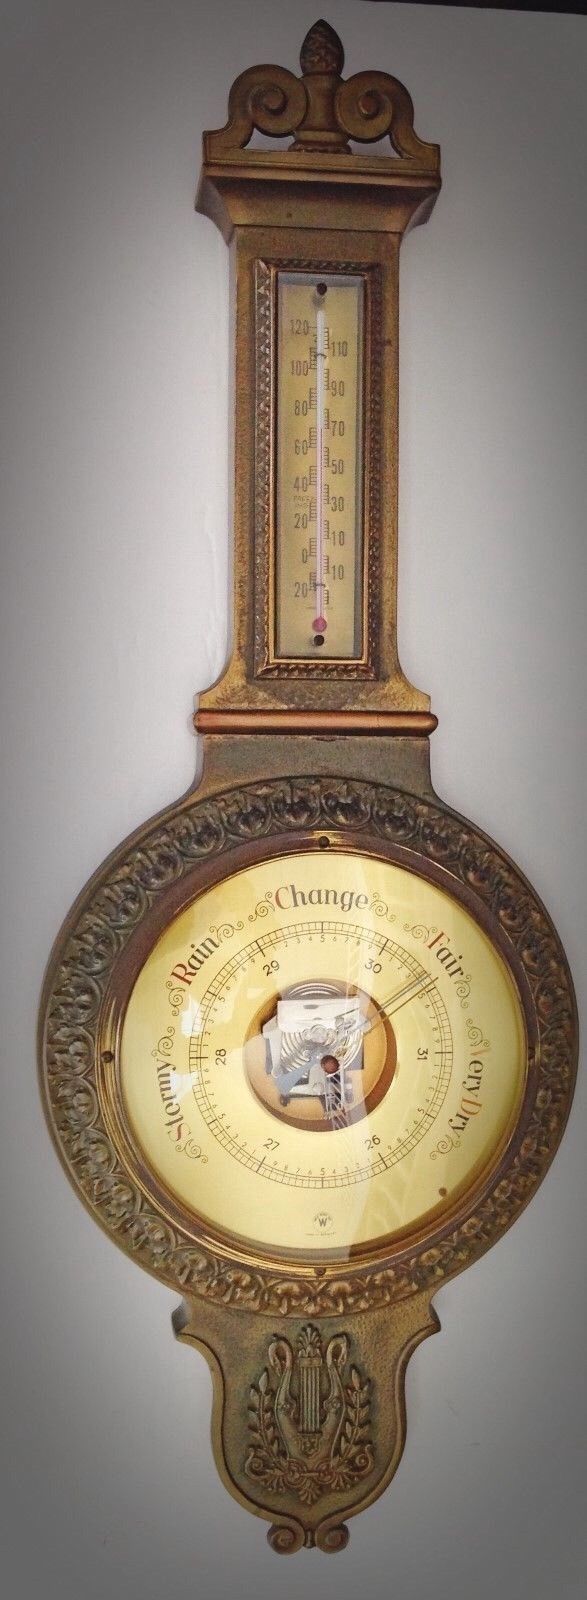 Antique/Vintage Bronze/Brass? Barometer / Thermometer - Made In Germany 1940s